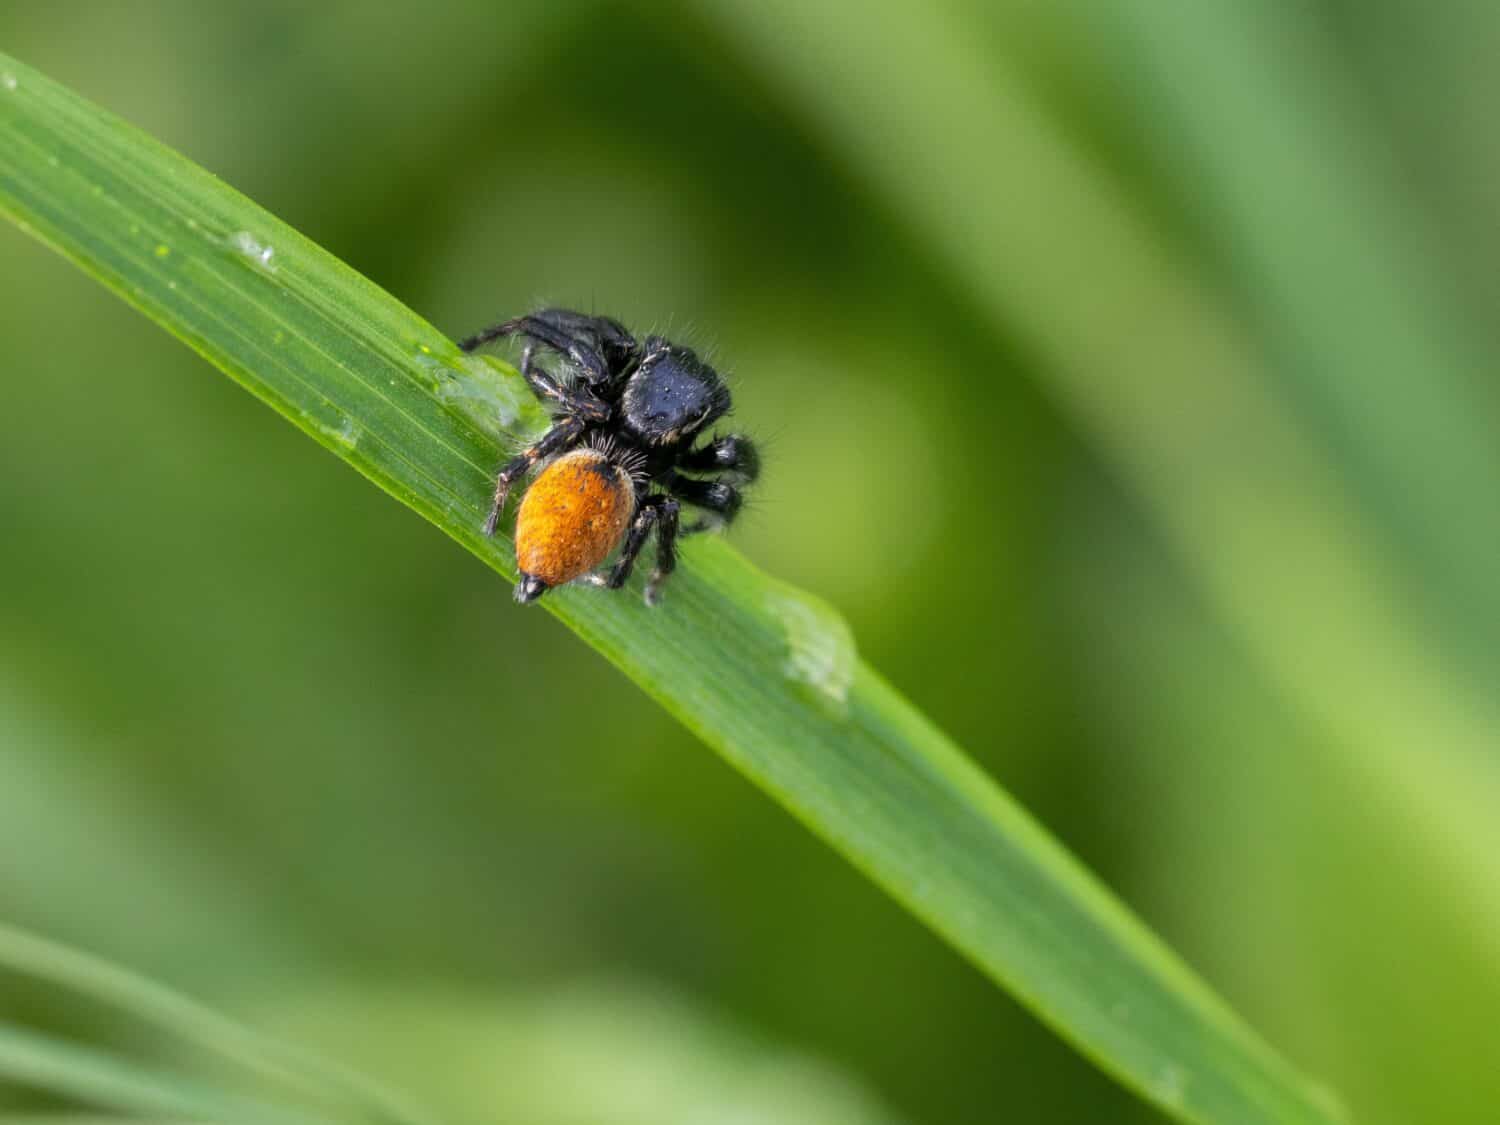 Phidippus johnsoni, the red-backed jumping spider, is one of the largest and most commonly encountered jumping spiders.